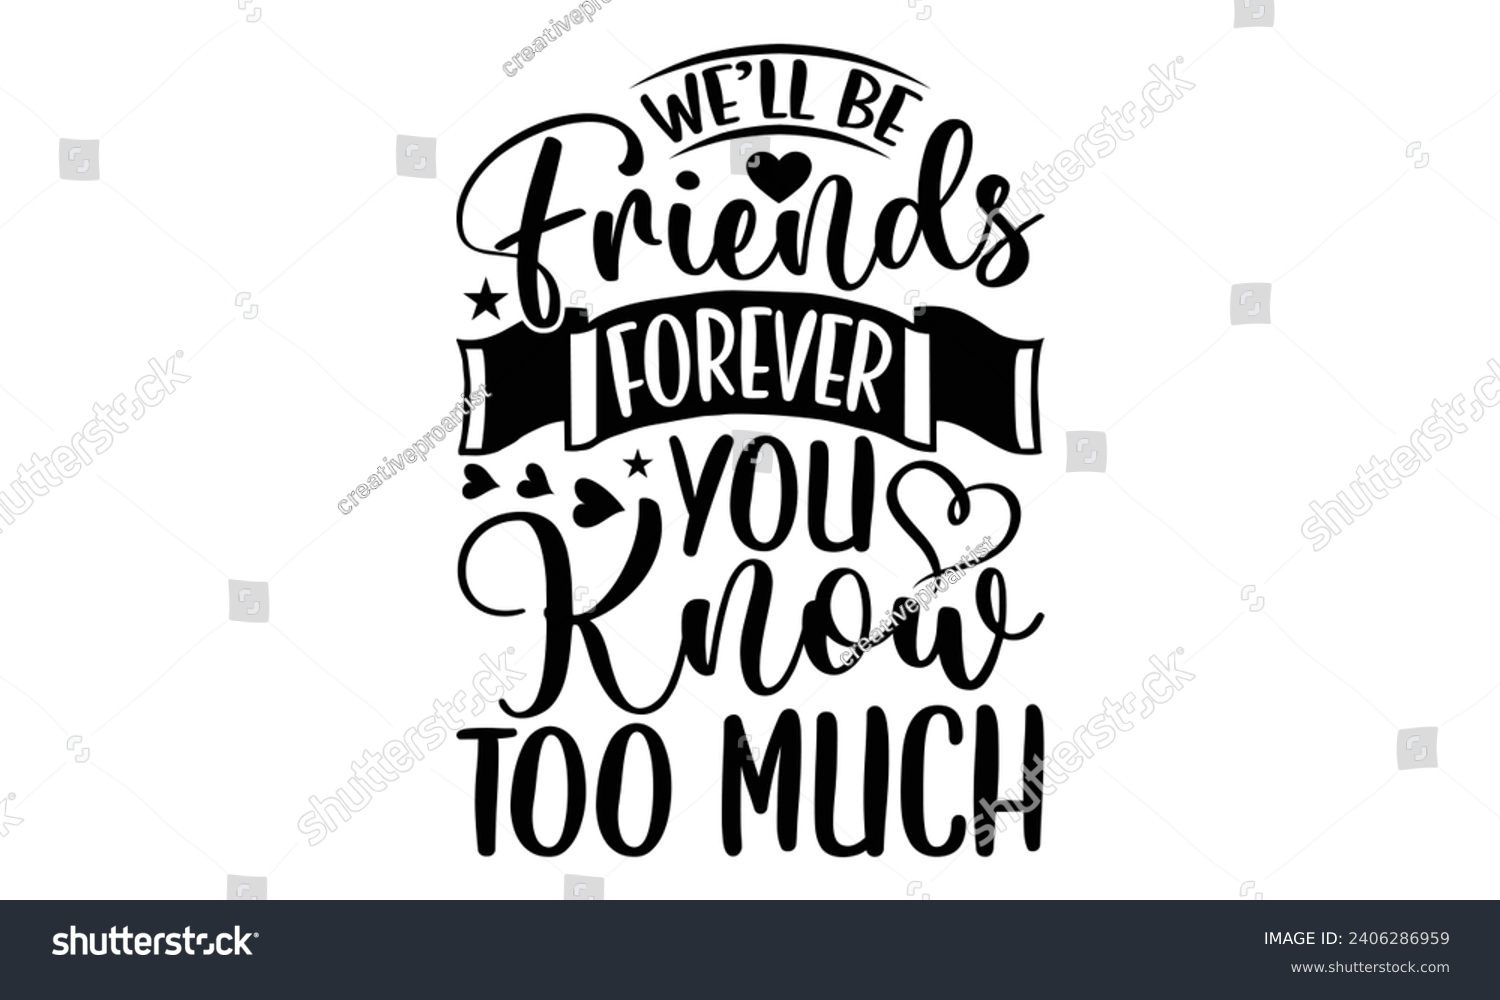 SVG of We’ll Be Friends Forever You Know Too Much- Best friends t- shirt design, Hand drawn vintage illustration with hand-lettering and decoration elements, greeting card template with typography text svg